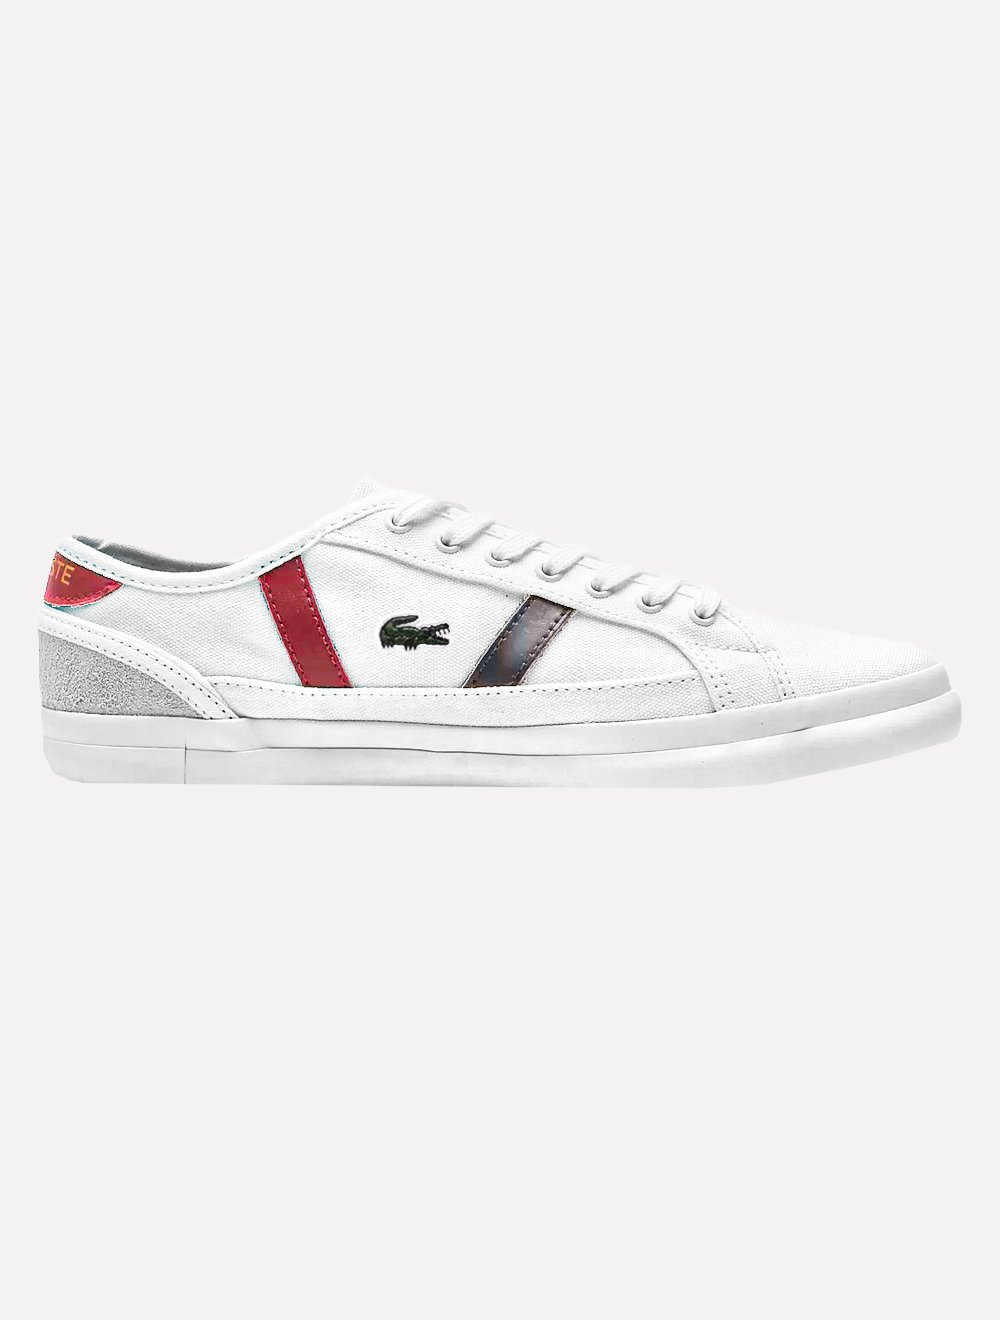 Tênis Lacoste Masculino Sideline Canvas Wht/DK Red/Nvy Branco